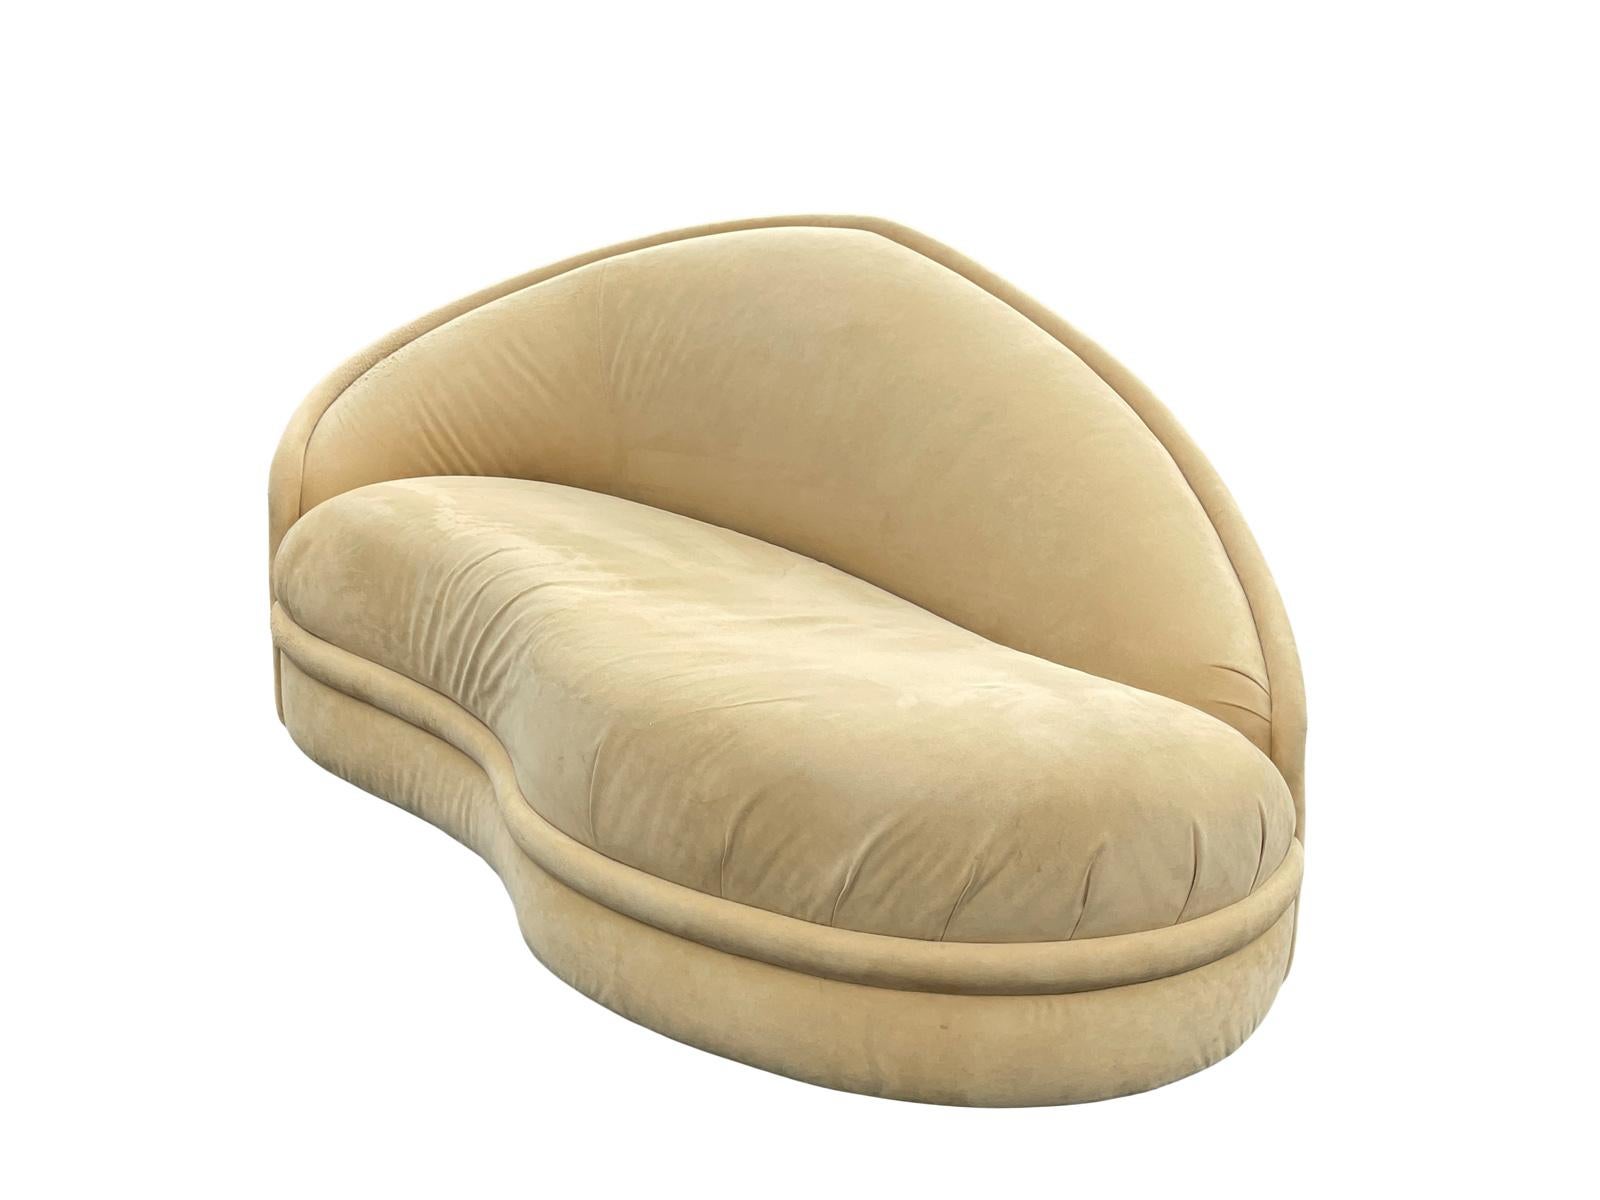 Stunning 6ft curvy chaise lounge with arched back in beige ultra suede in ready to use condition 